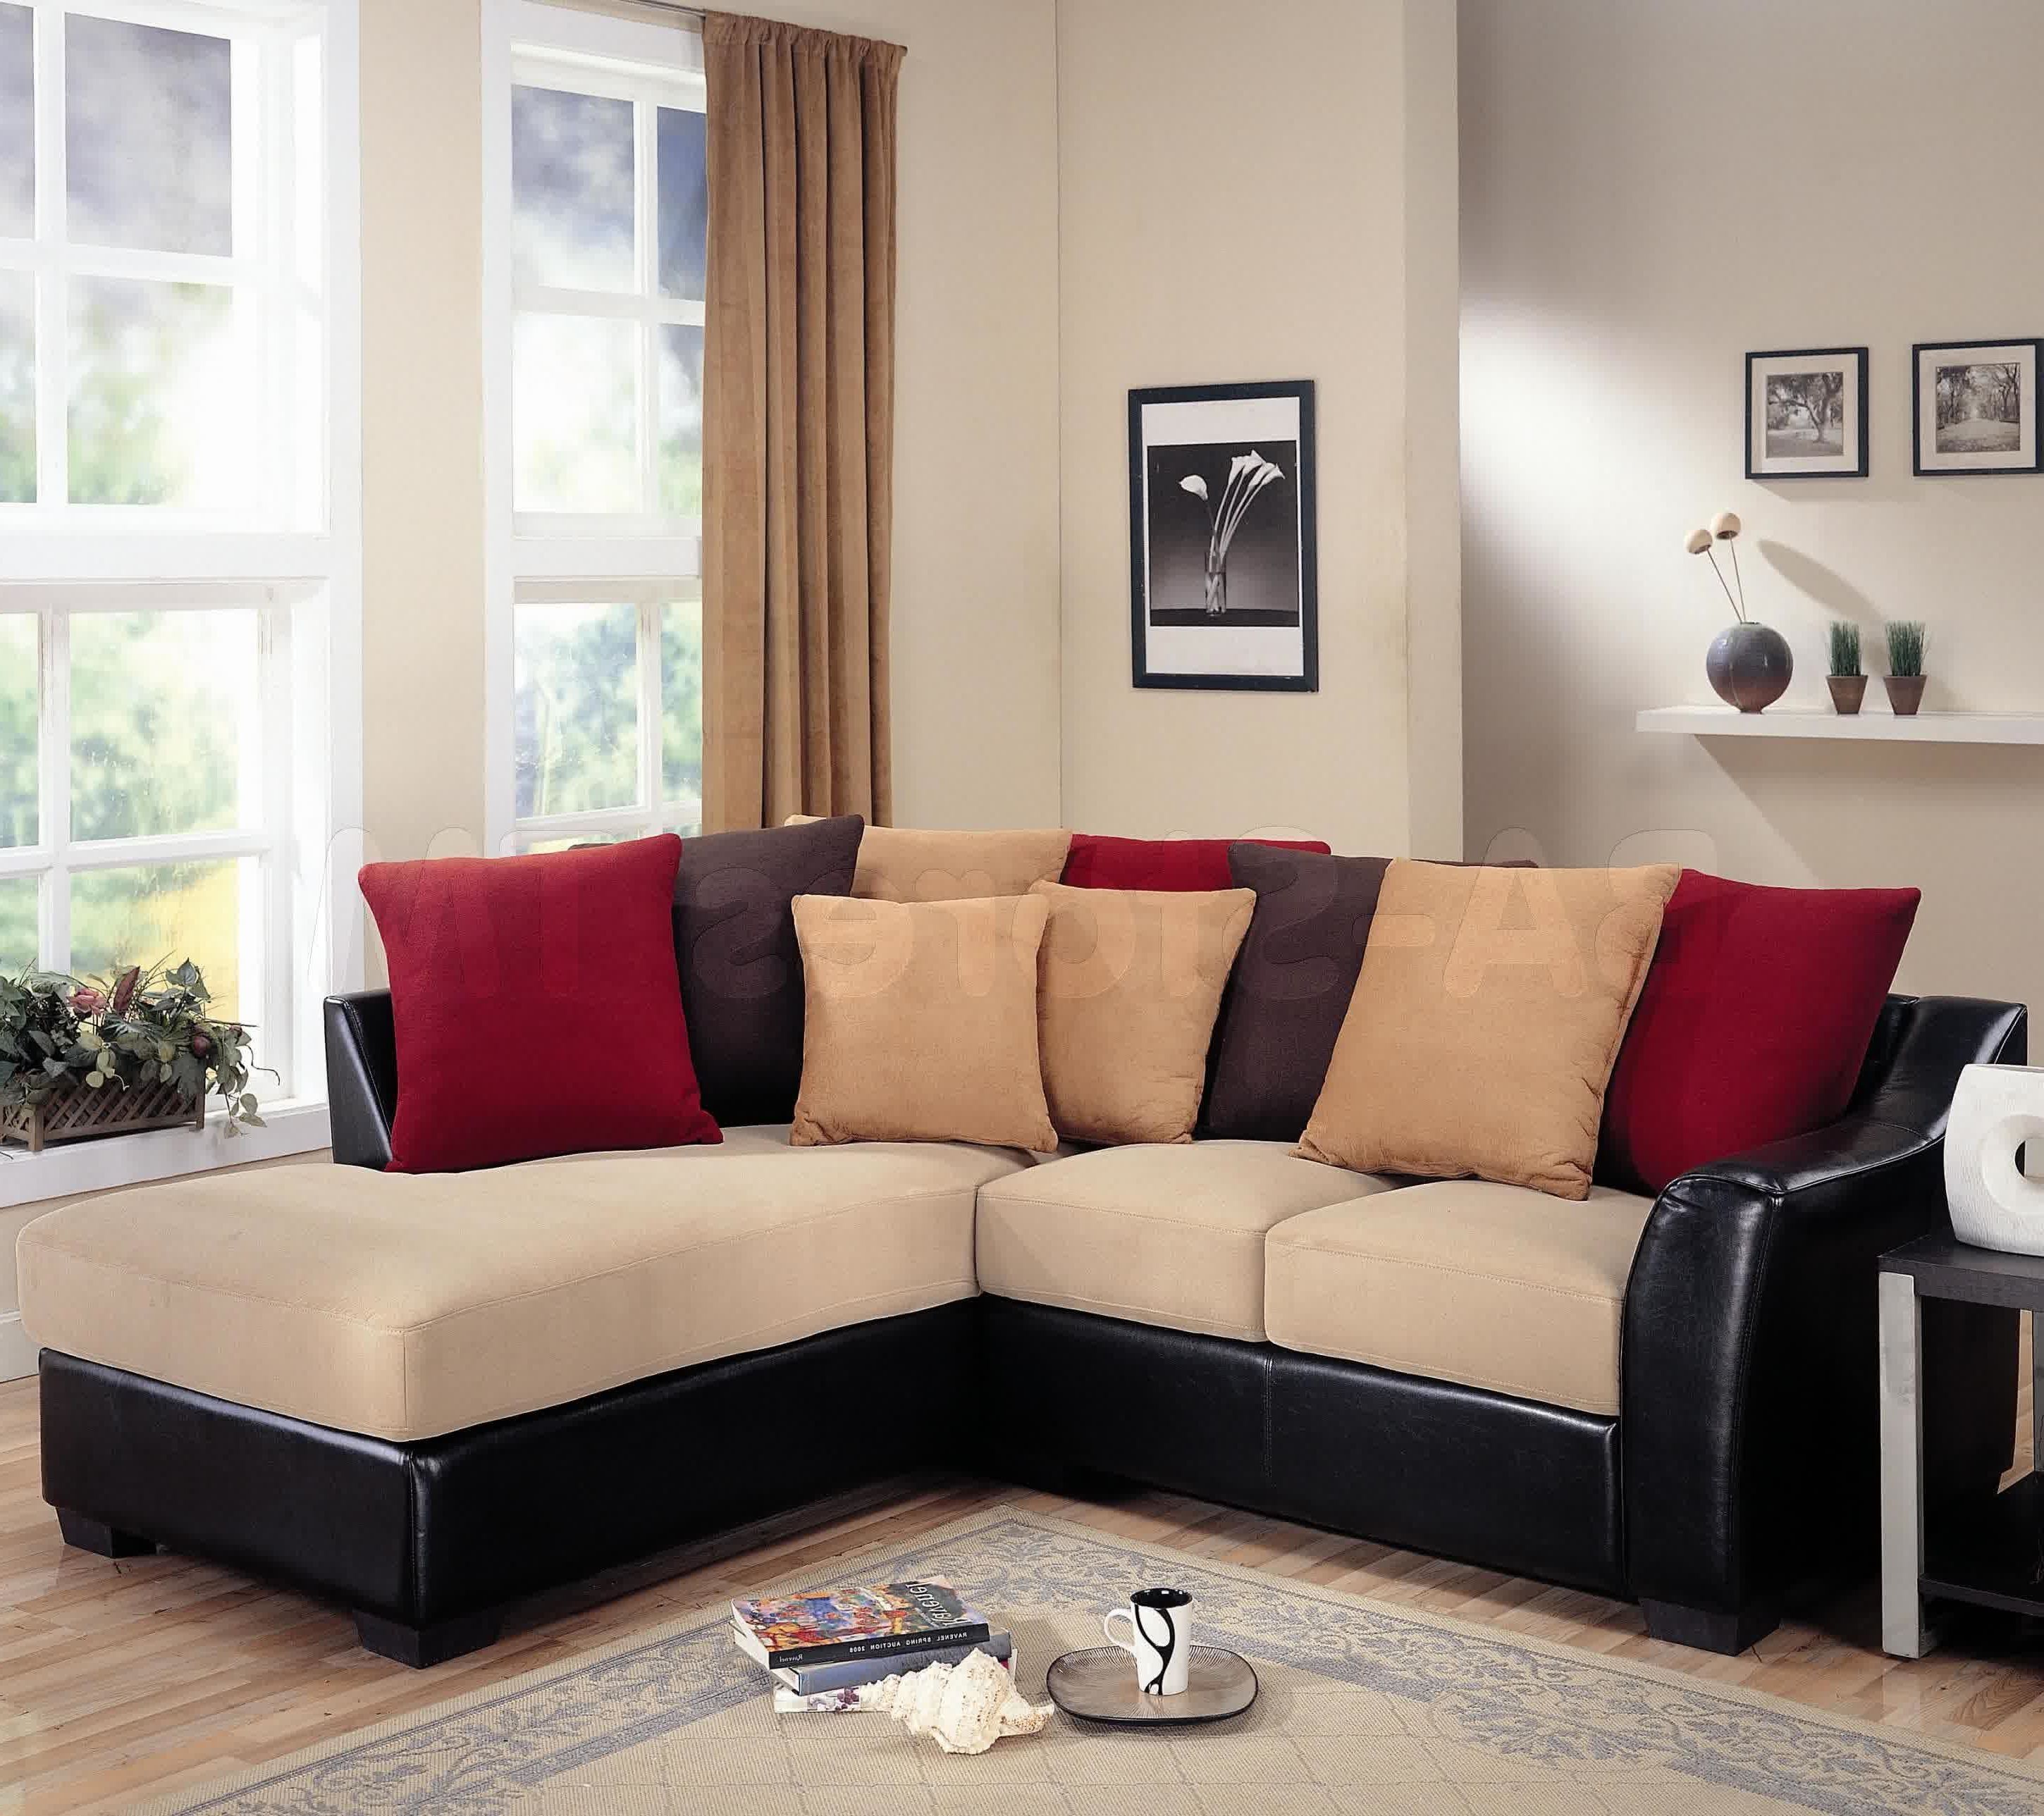 Most Current On Sale Sectional Sofas Within Home Designs : Bobs Living Room Sets Cheap Sectional Sofas Under (View 1 of 15)